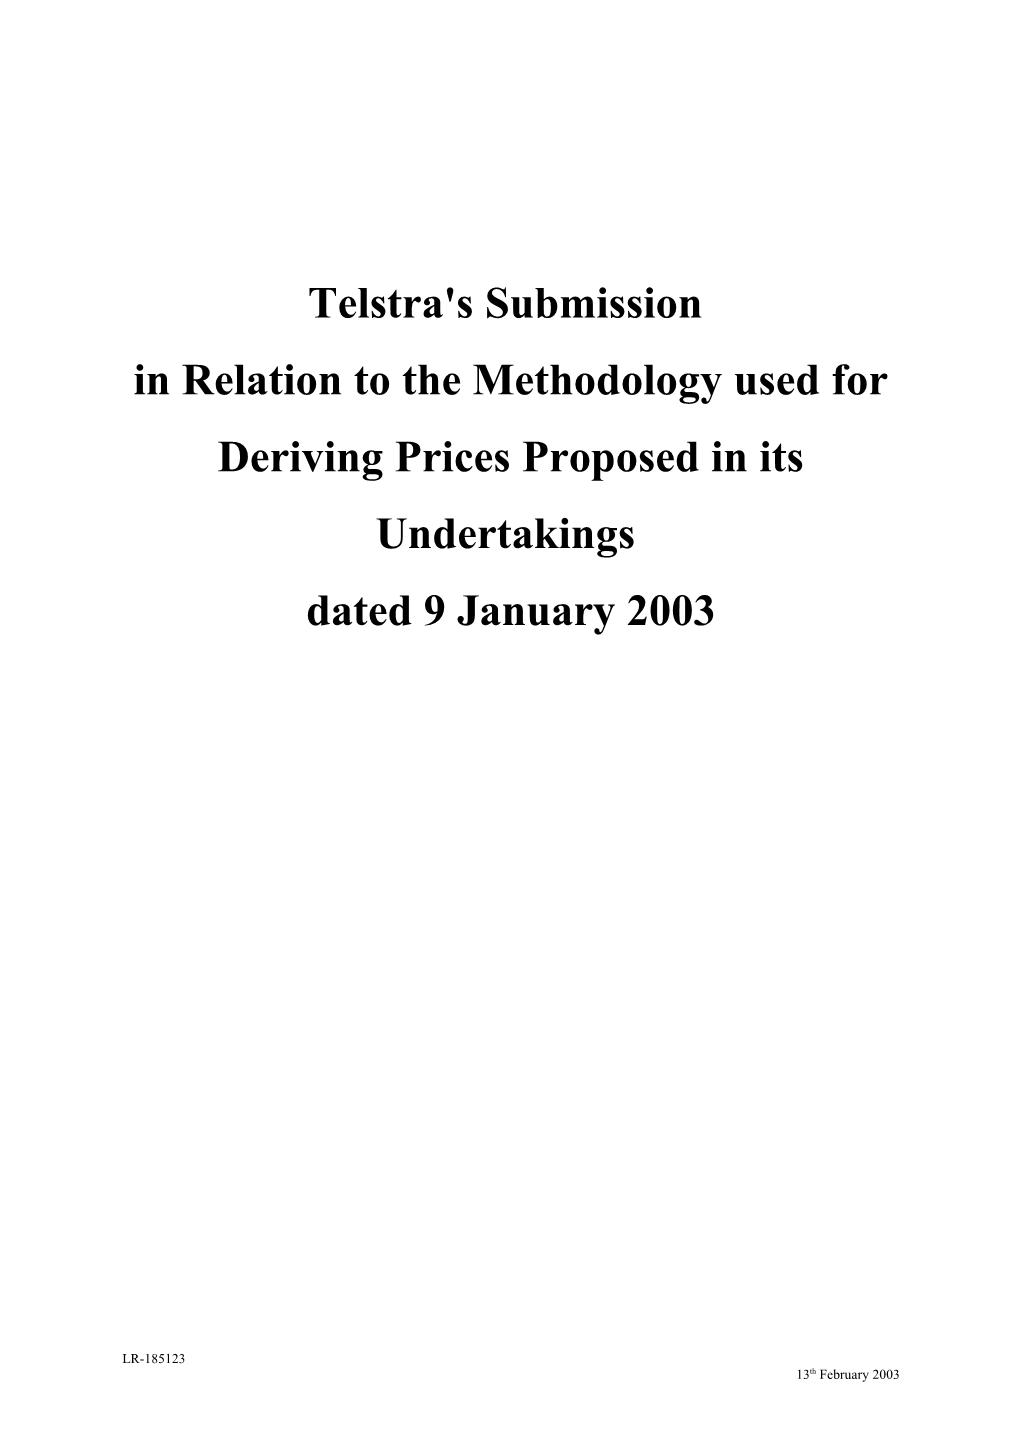 Telstra's Submission in Relation to the Methodology Used for Deriving Prices Proposed